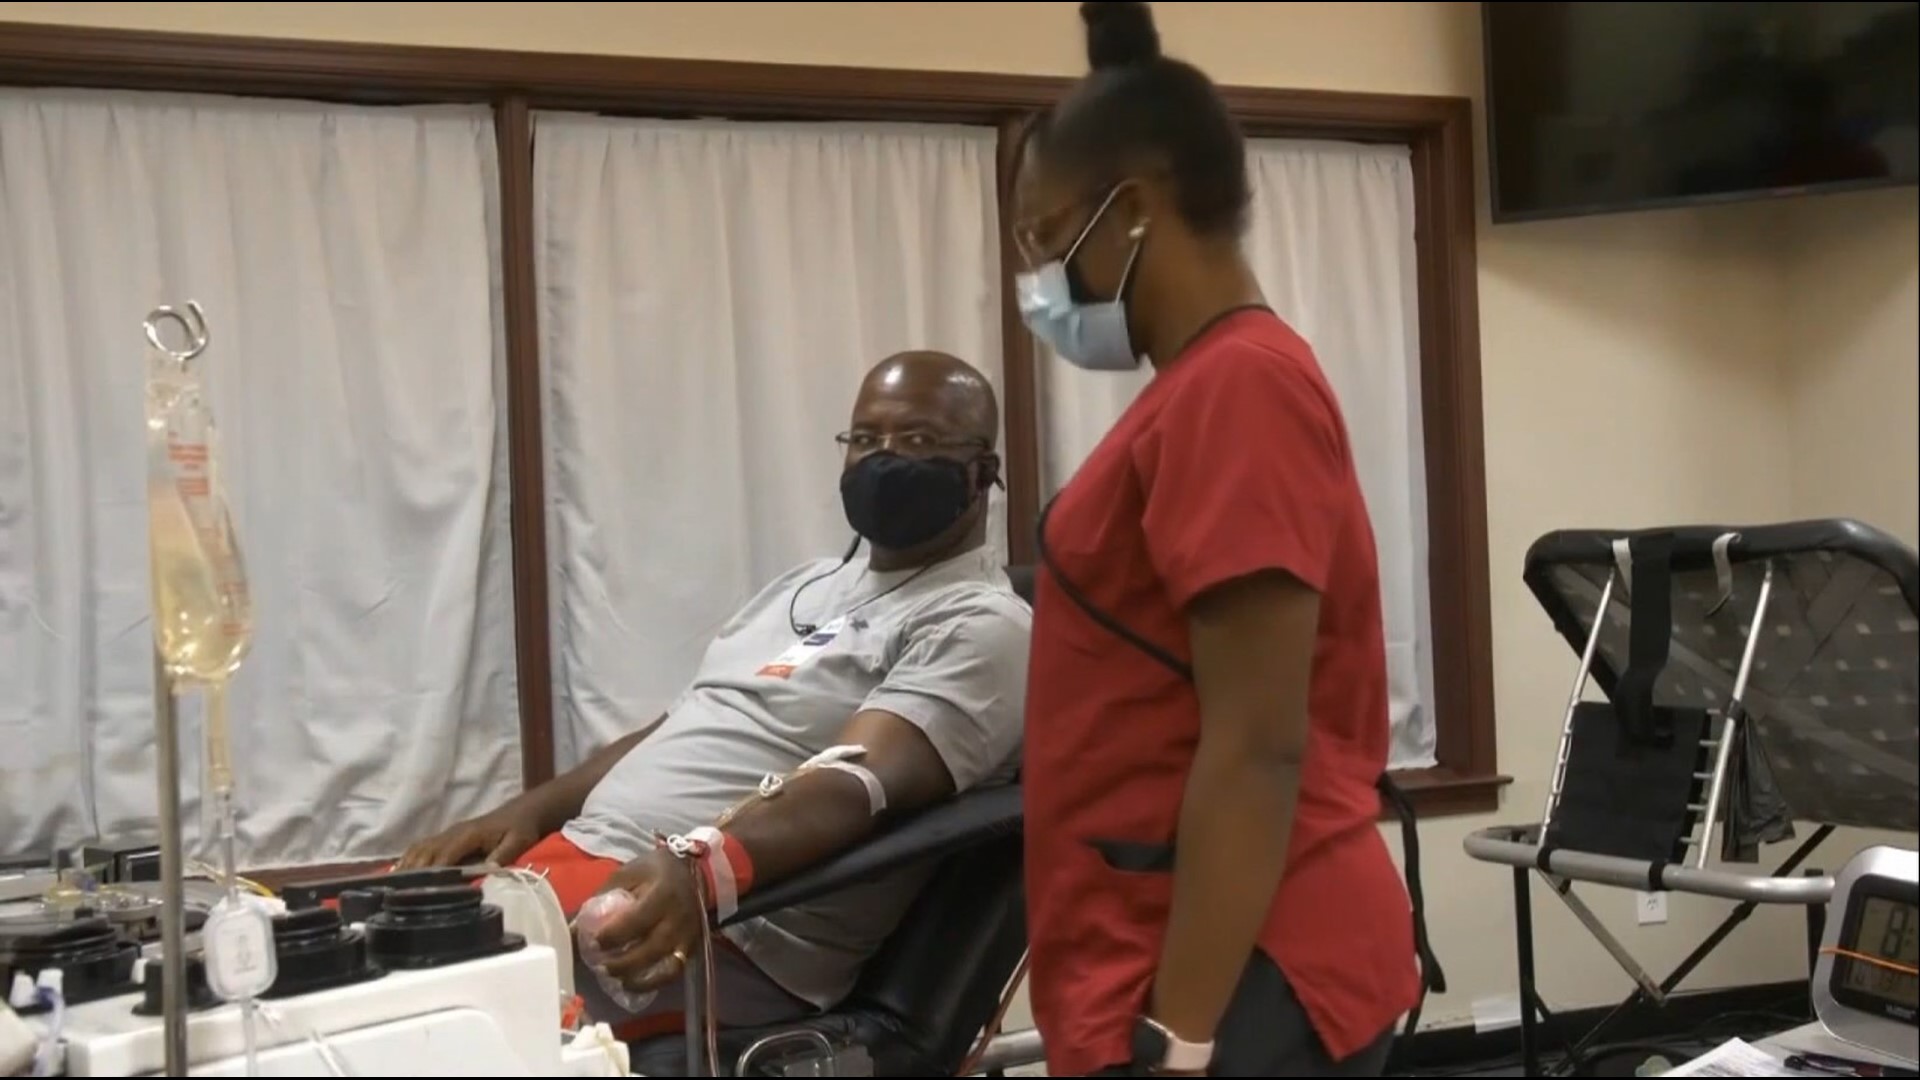 Officials at the blood center said the donations are essential to maintaining a stable supply of blood and platelets in impacted region.